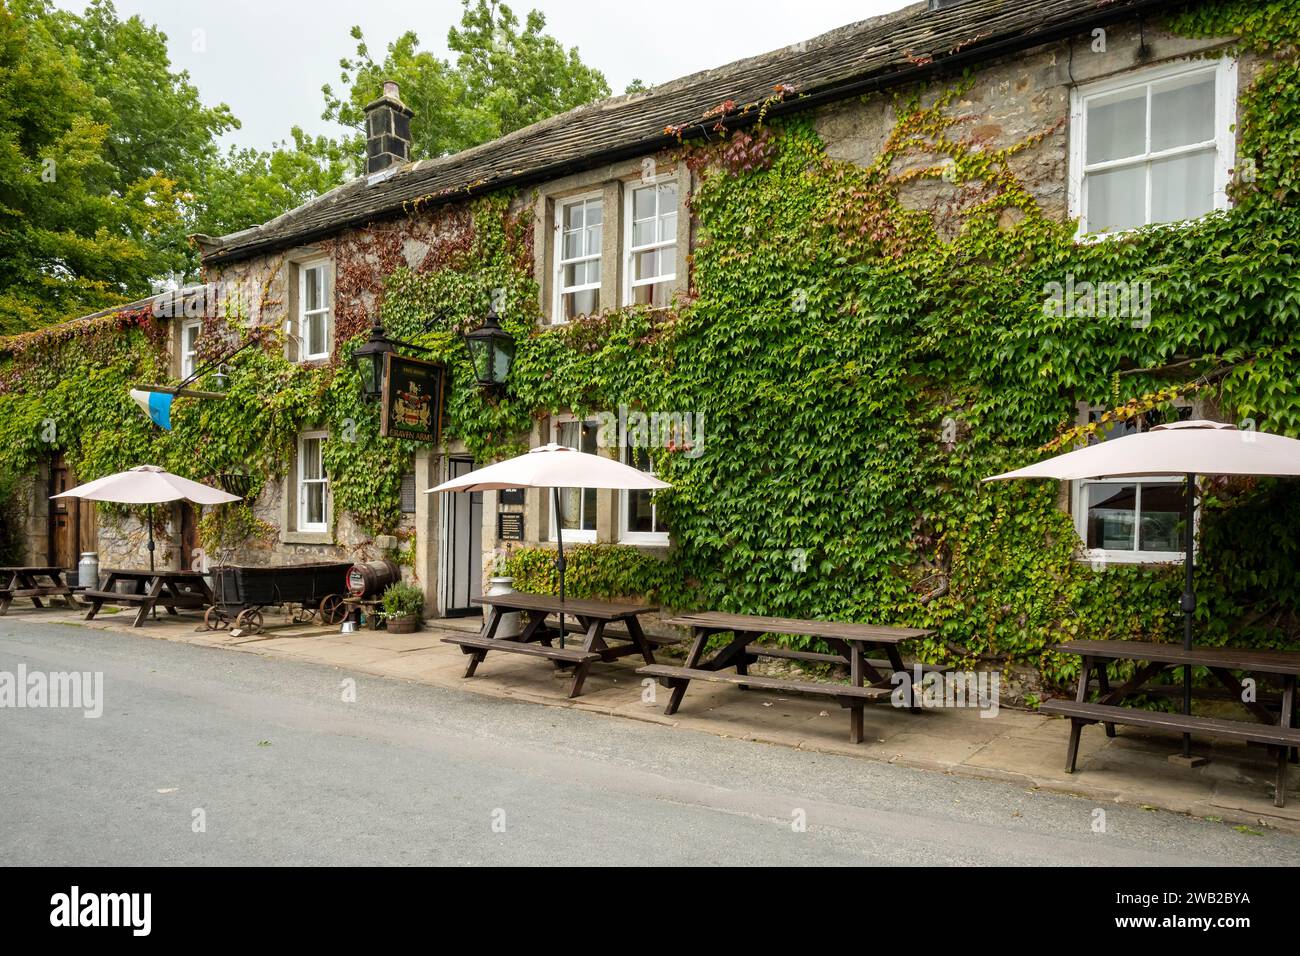 Die Craven Arms in Appletreewick bei Bolton Abbey in Wharfedale. Stockfoto